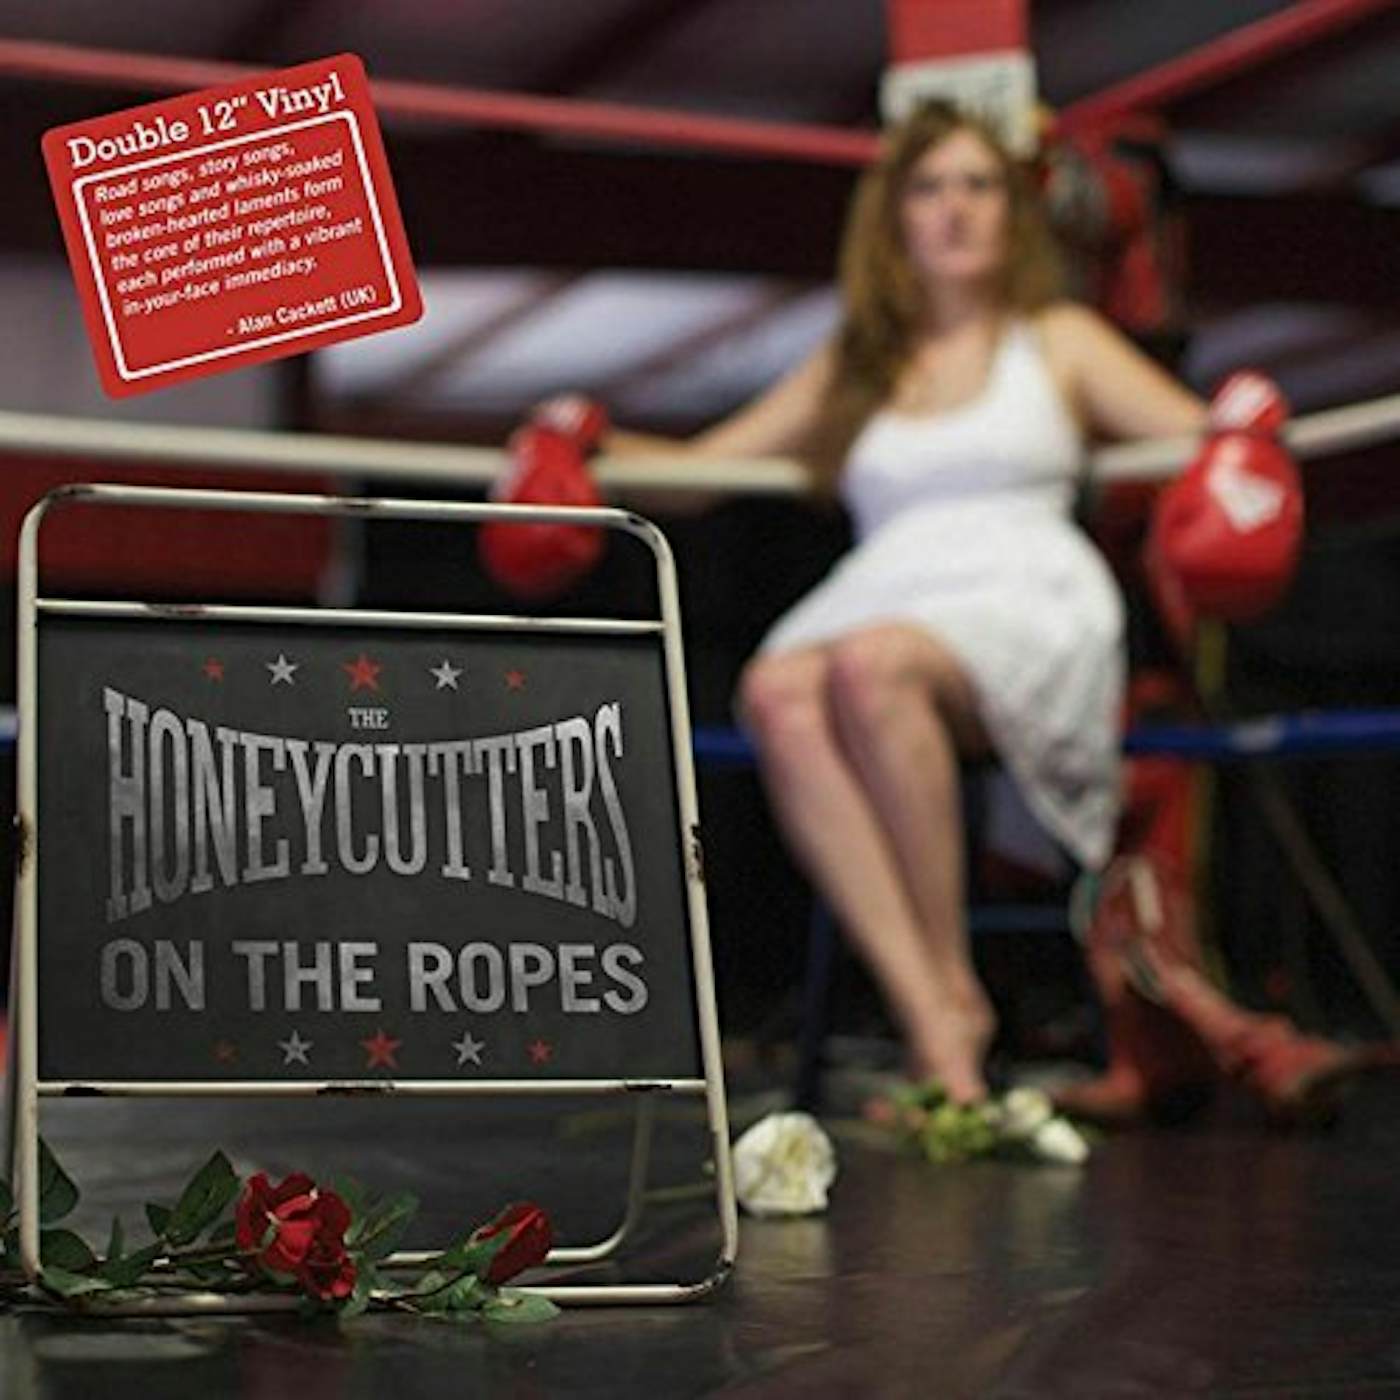 HONEYCUTTERS ON THE ROPES CD